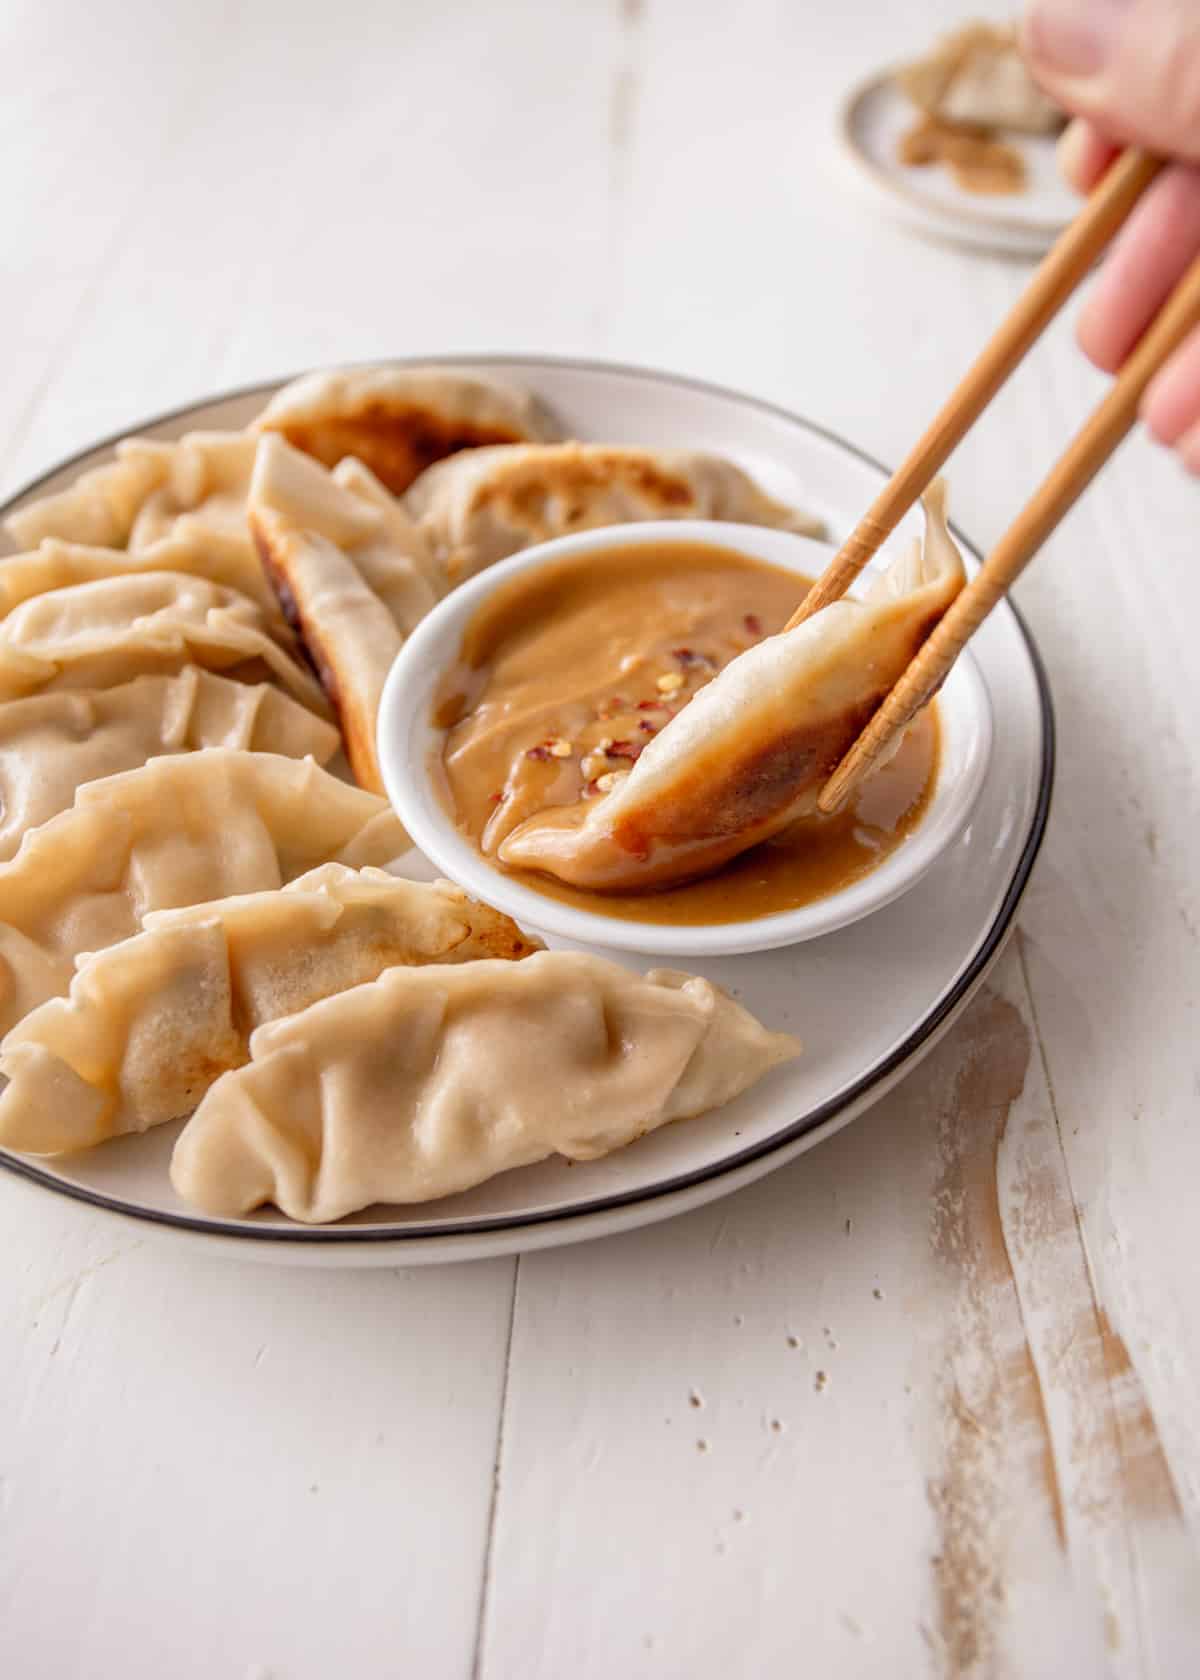 dipping a potsticker into a small bowl of peanut sauce